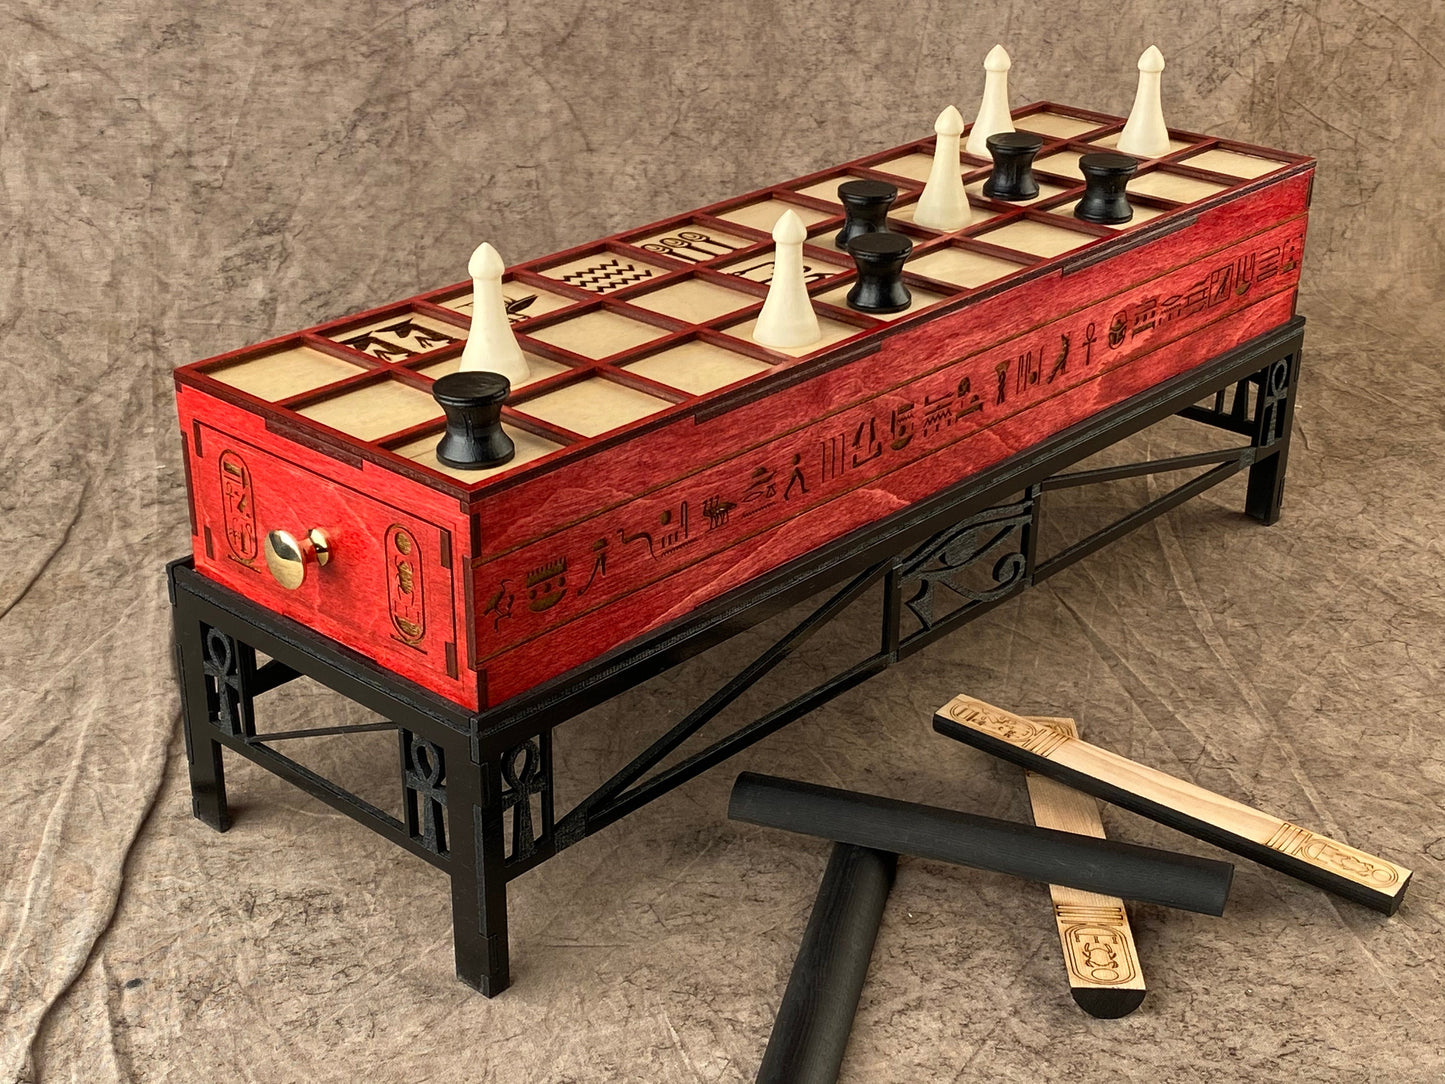 The Anubis SENET. A Game from the Ancient Egyptian Underworld! Stunning Blood Red & Black.